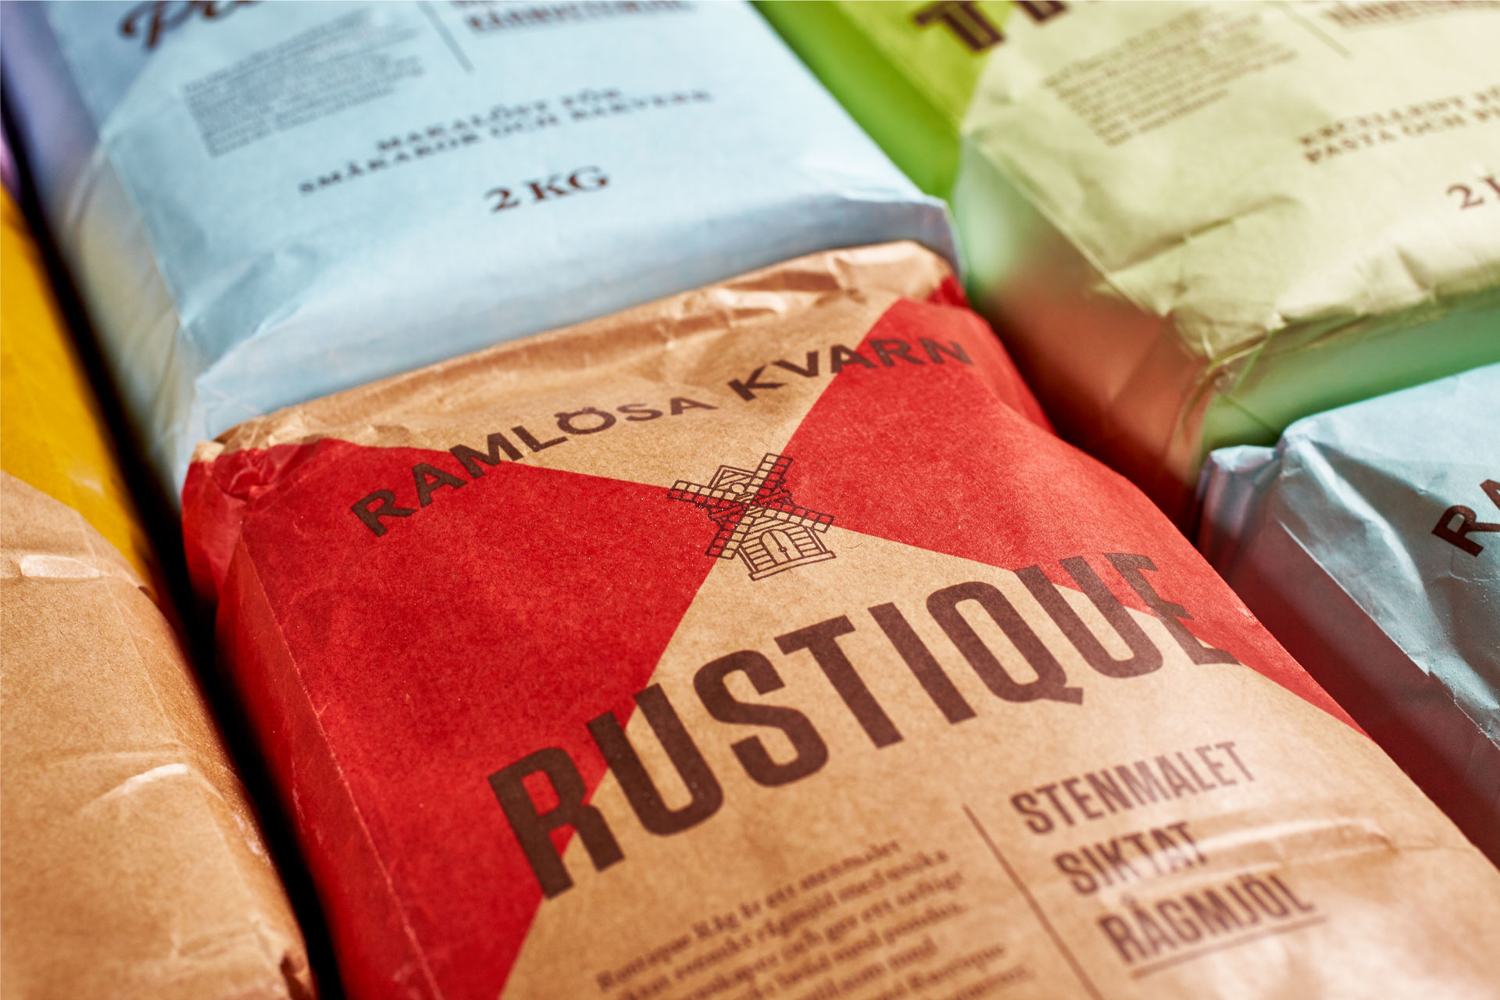 Branding and packaging for Swedish flour business Ramlösa Kvarn by Amore.